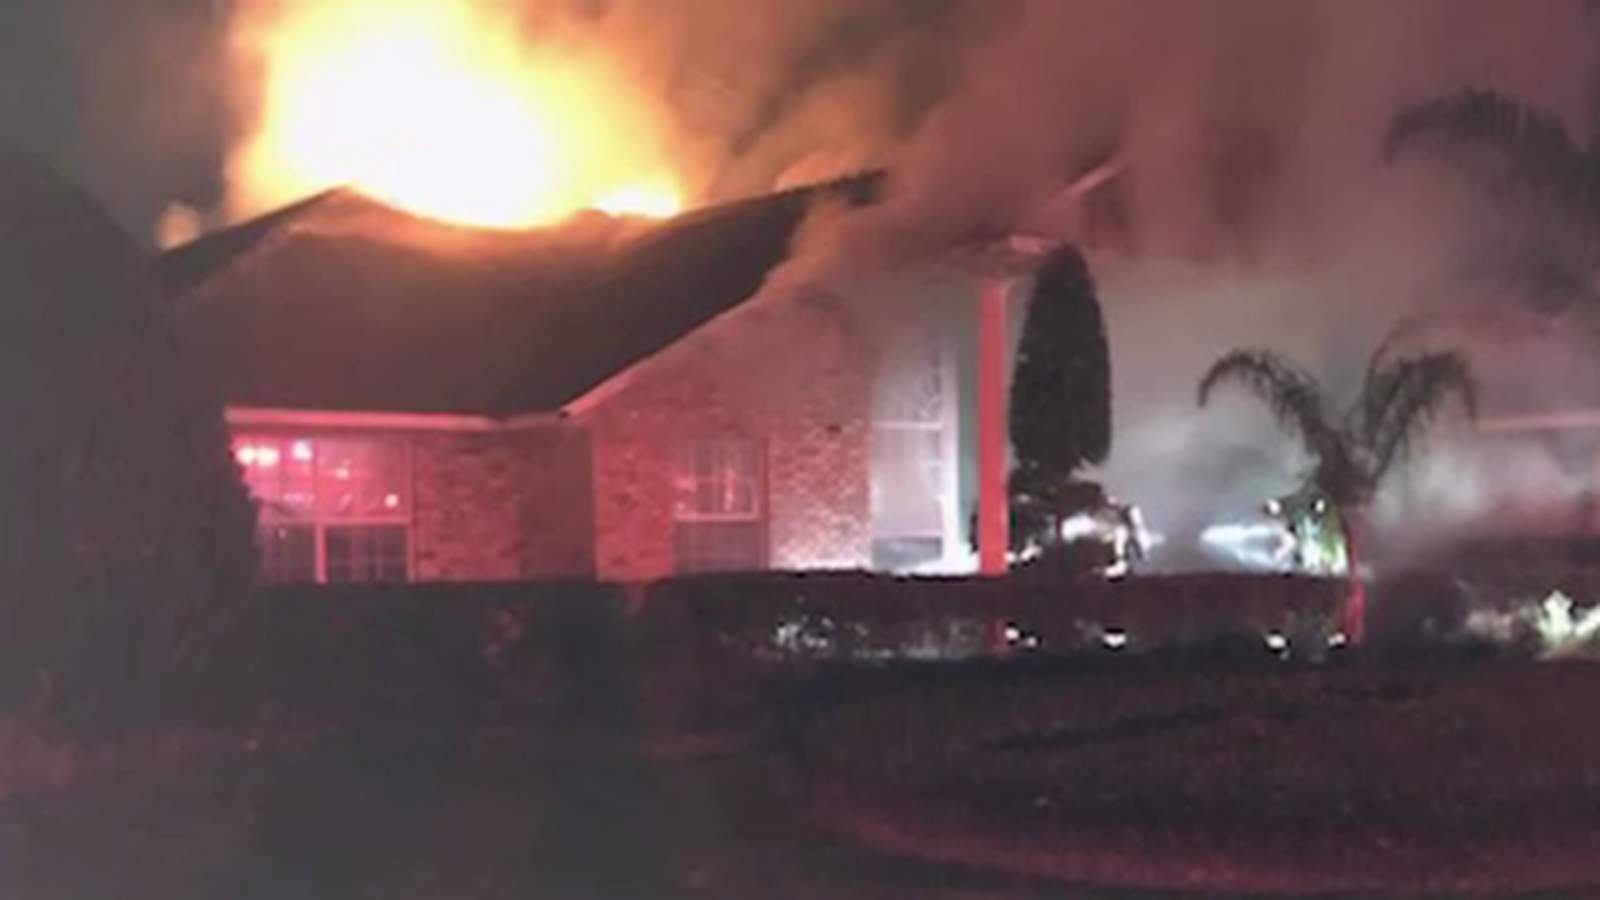 Well-known morning DJ in Orlando loses house to fire